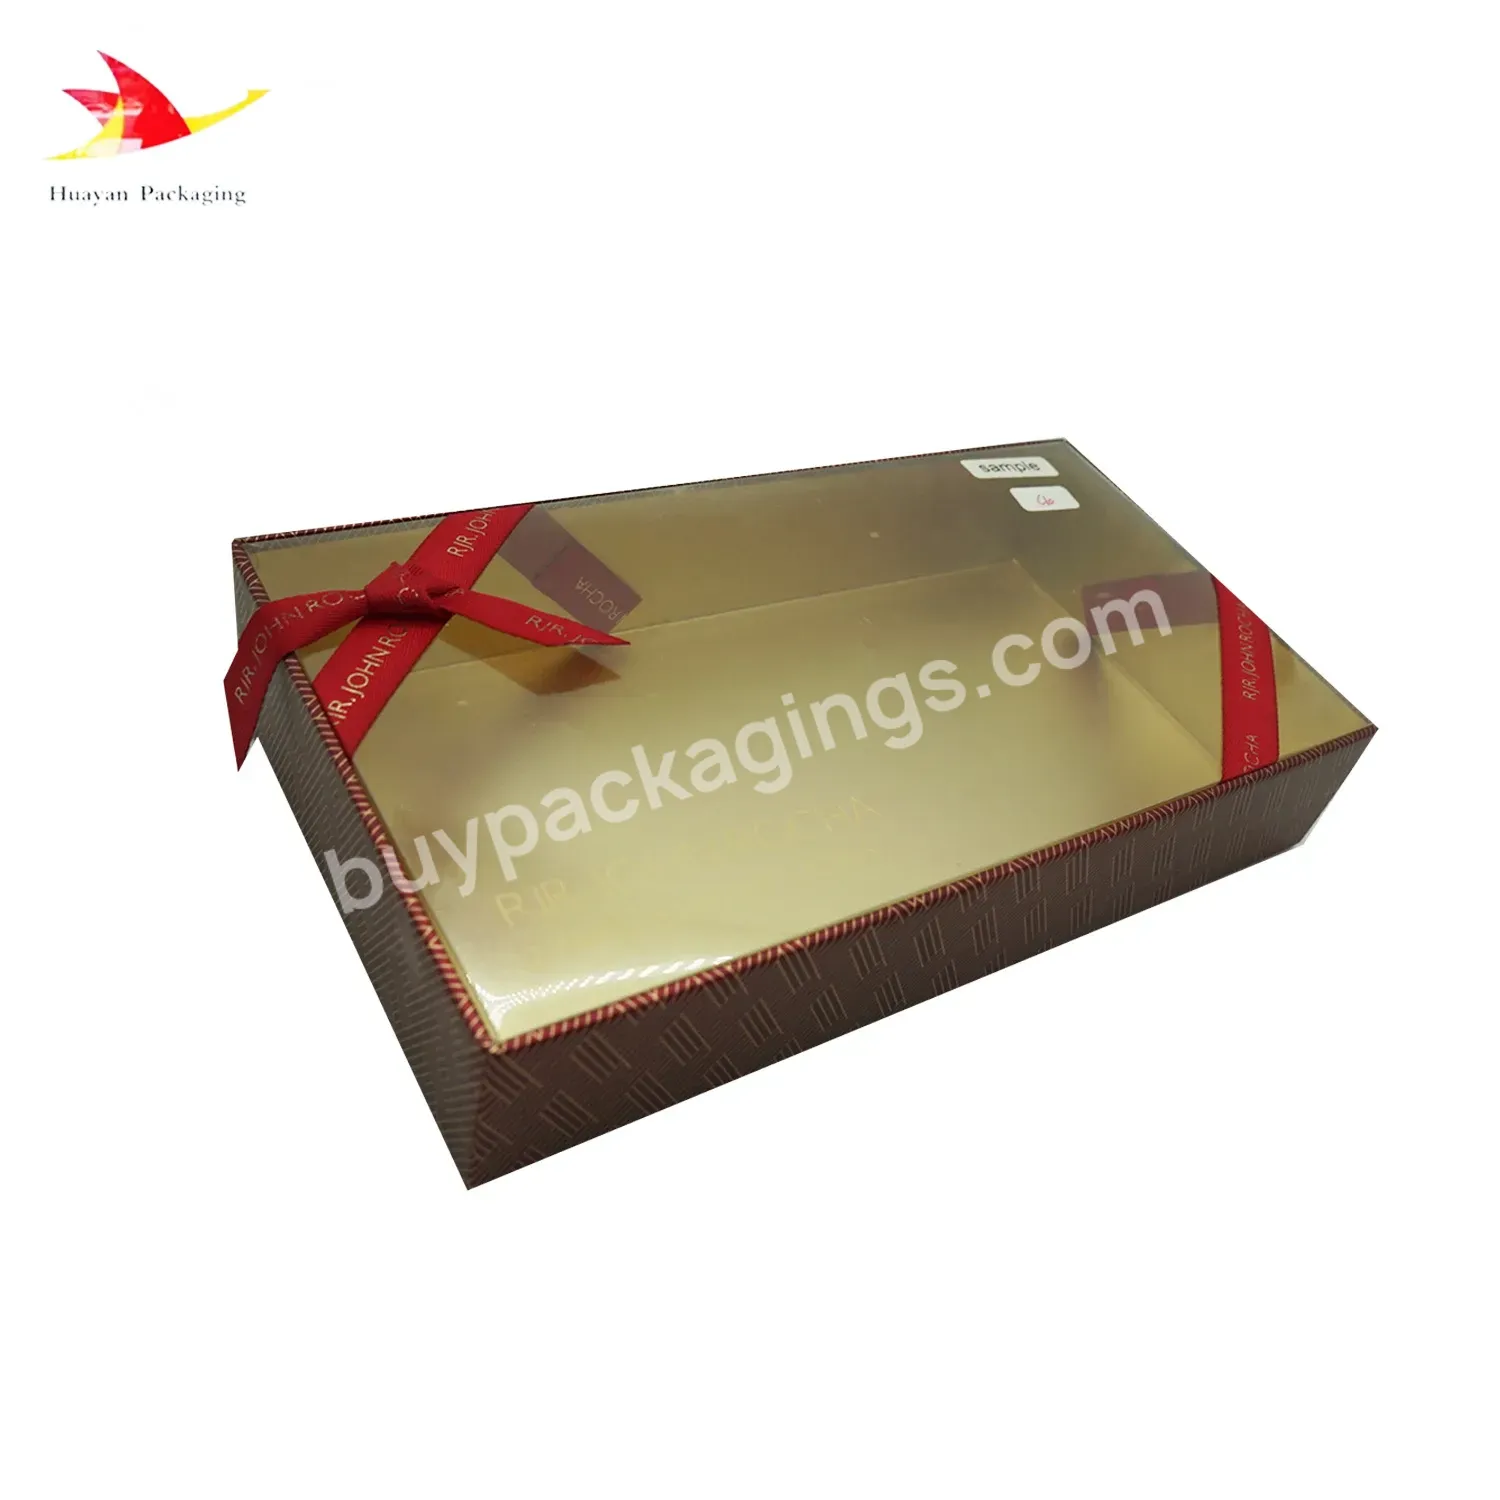 Made By Factory Pvc Top Cover Box With A Bow Of Ribbonchristmas Series Gift Holiday Pvc Packing